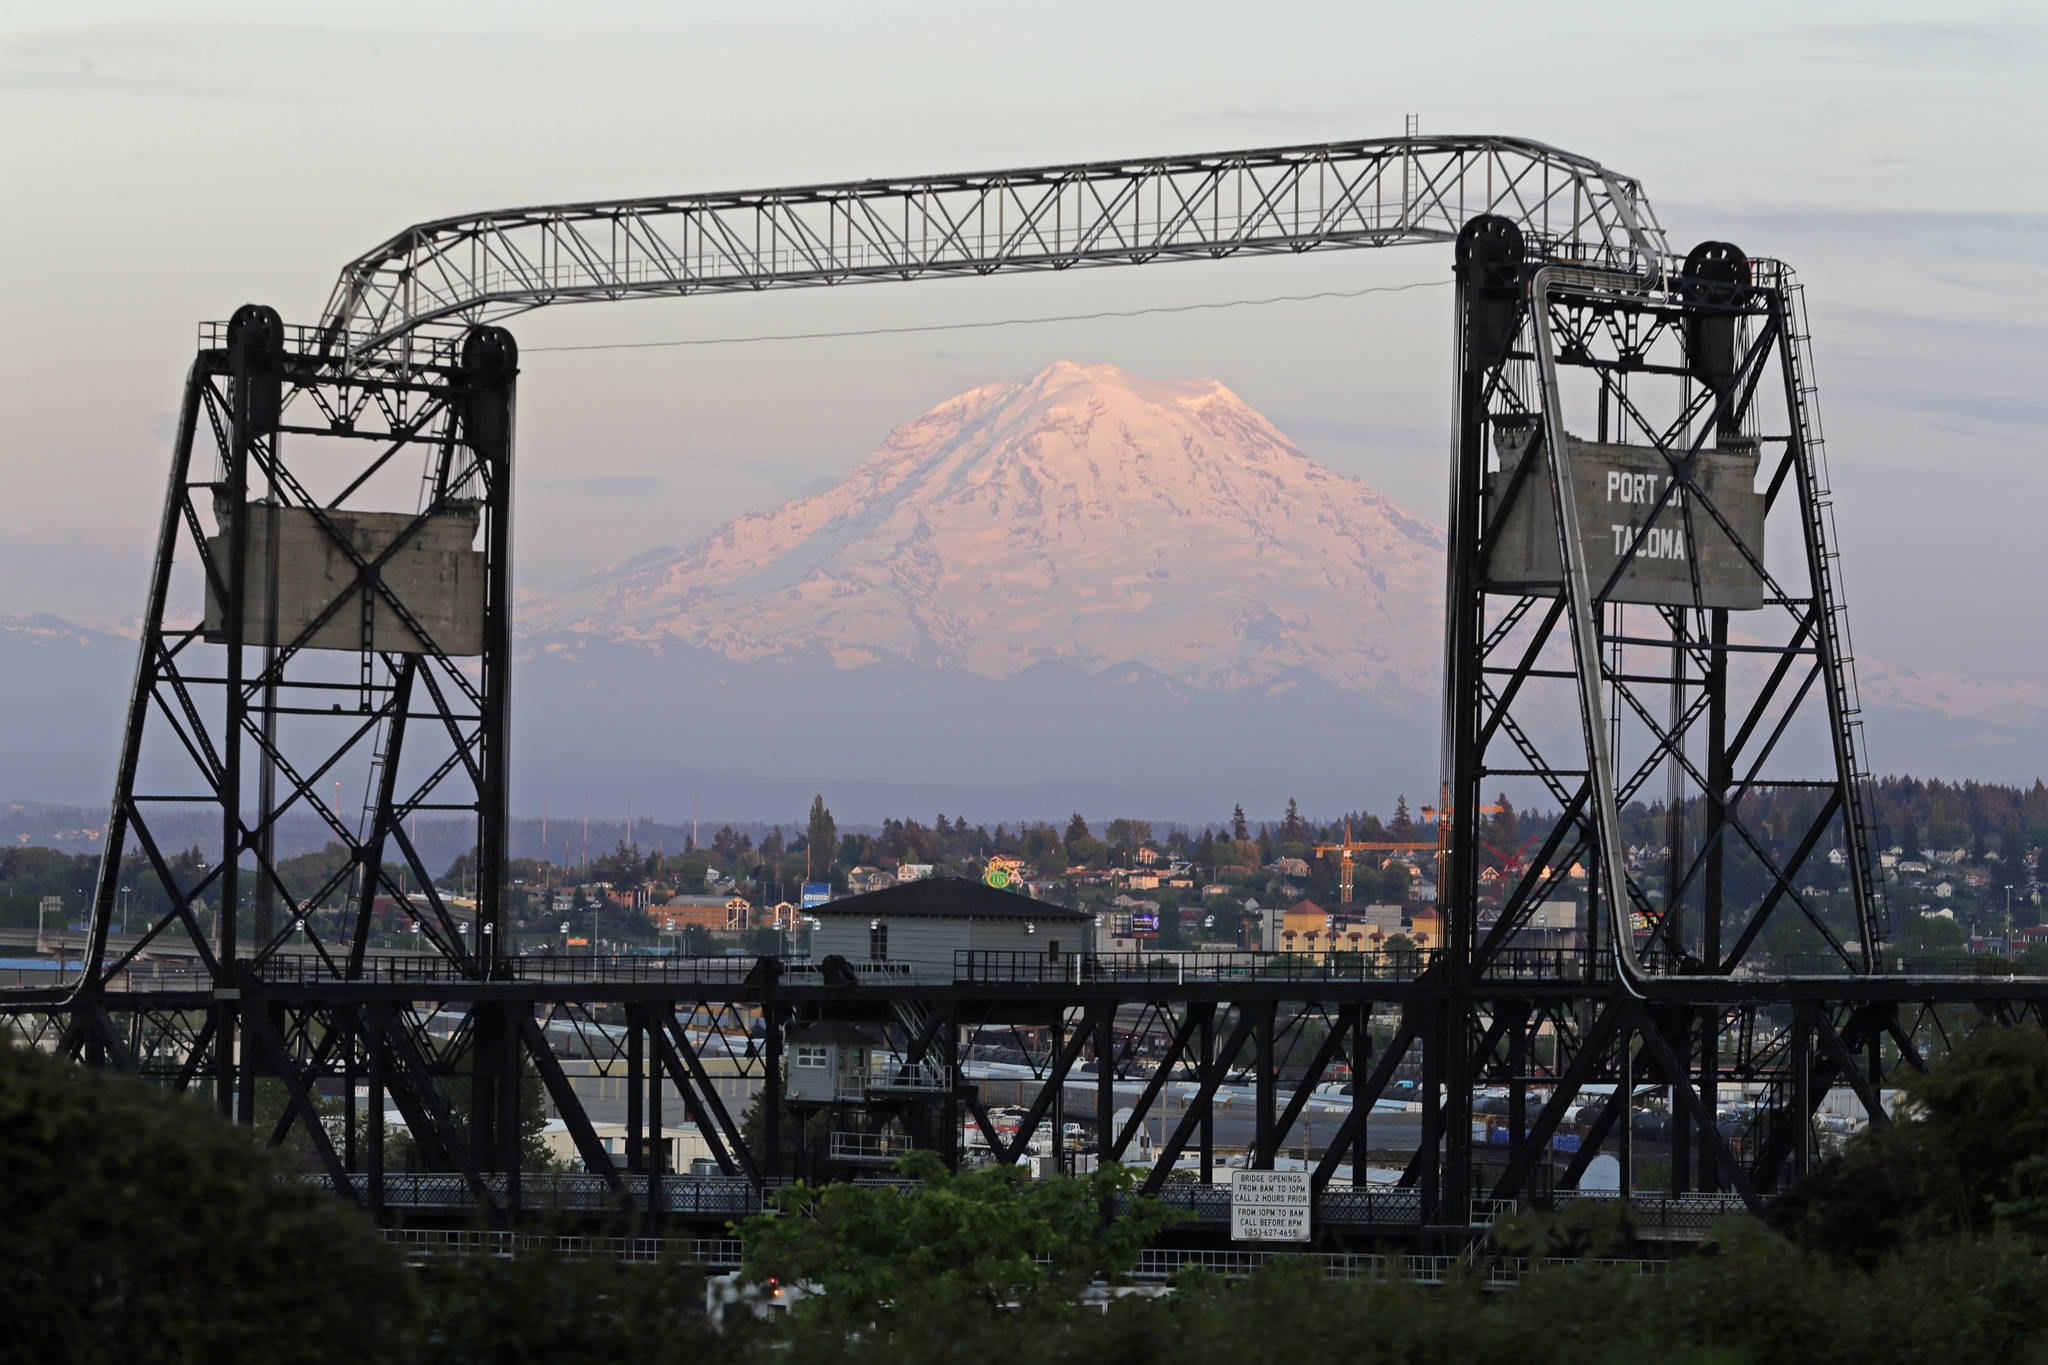 In this May 7, 2018 photo, Mount Rainier is seen at dusk and framed by the Murray Morgan Bridge in downtown Tacoma, Wash. The eruption of the Kilauea volcano in Hawaii has geologic experts along the West Coast warily eyeing the volcanic peaks in Washington, Oregon and California, including Rainier, that are part of the Pacific Ocean’s ring of fire. (AP Photo/Ted S. Warren)